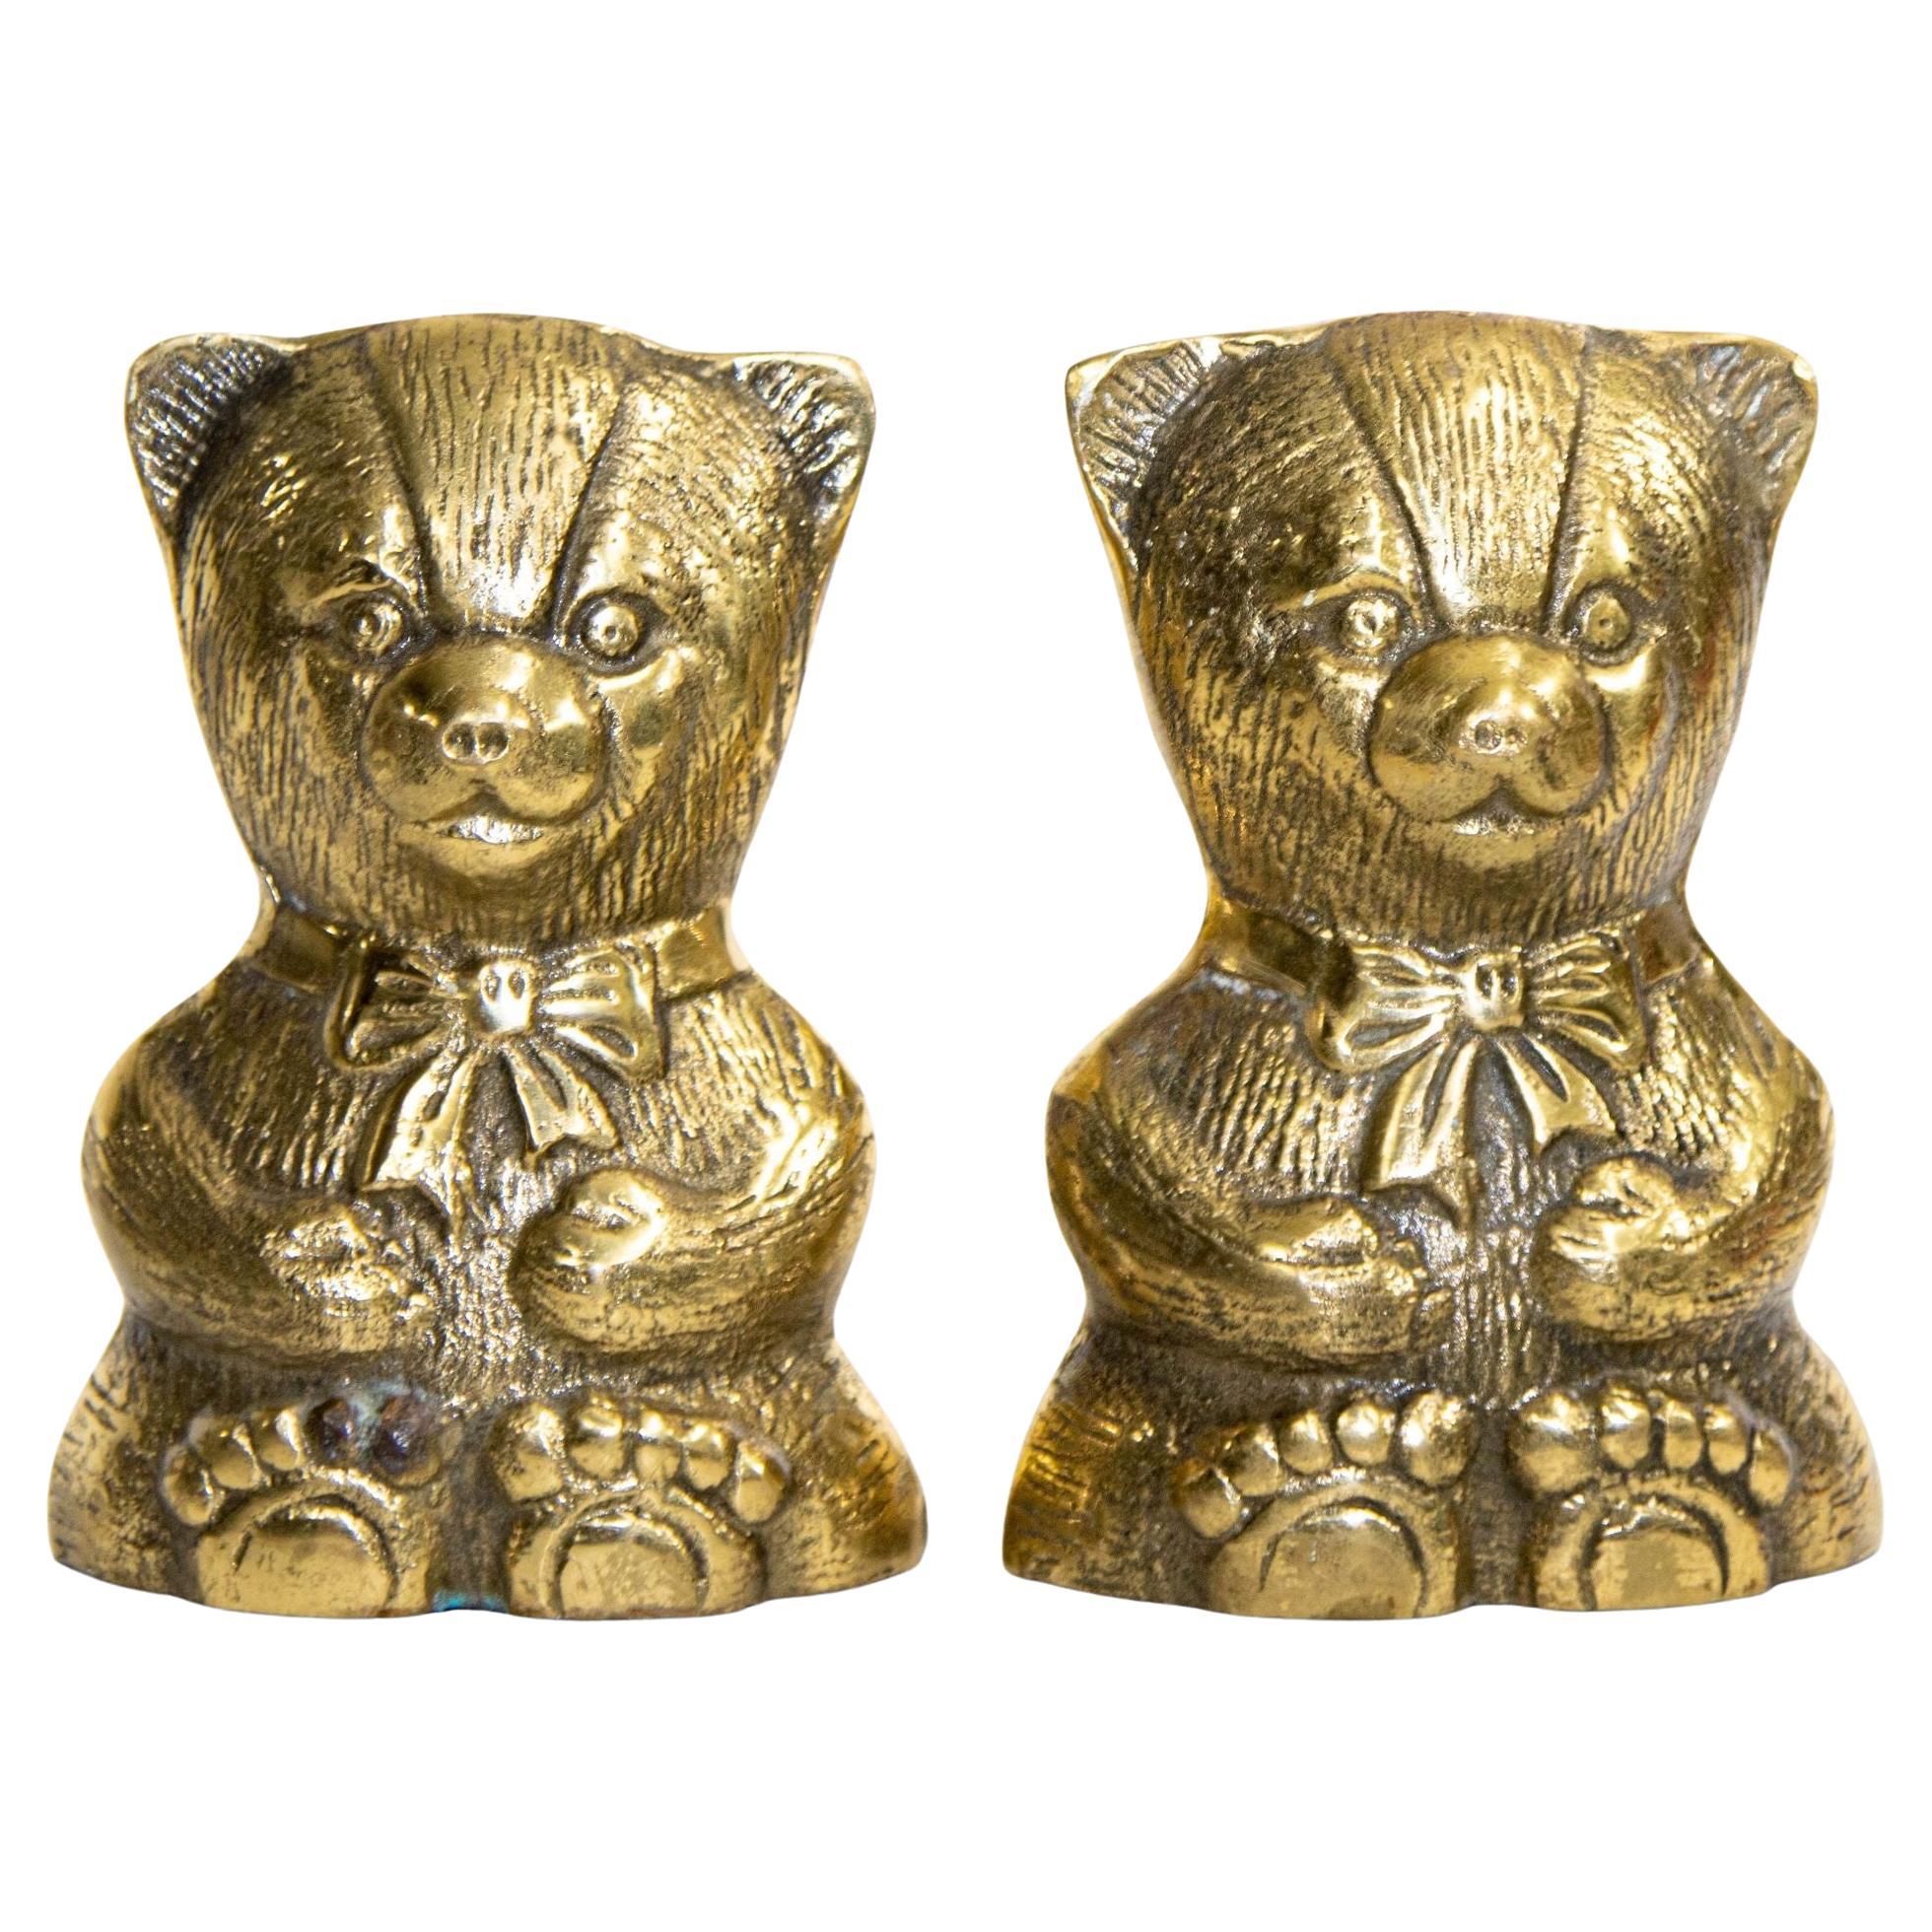 Polished Brass Teddy Bear Vintage Bookends Paperweights